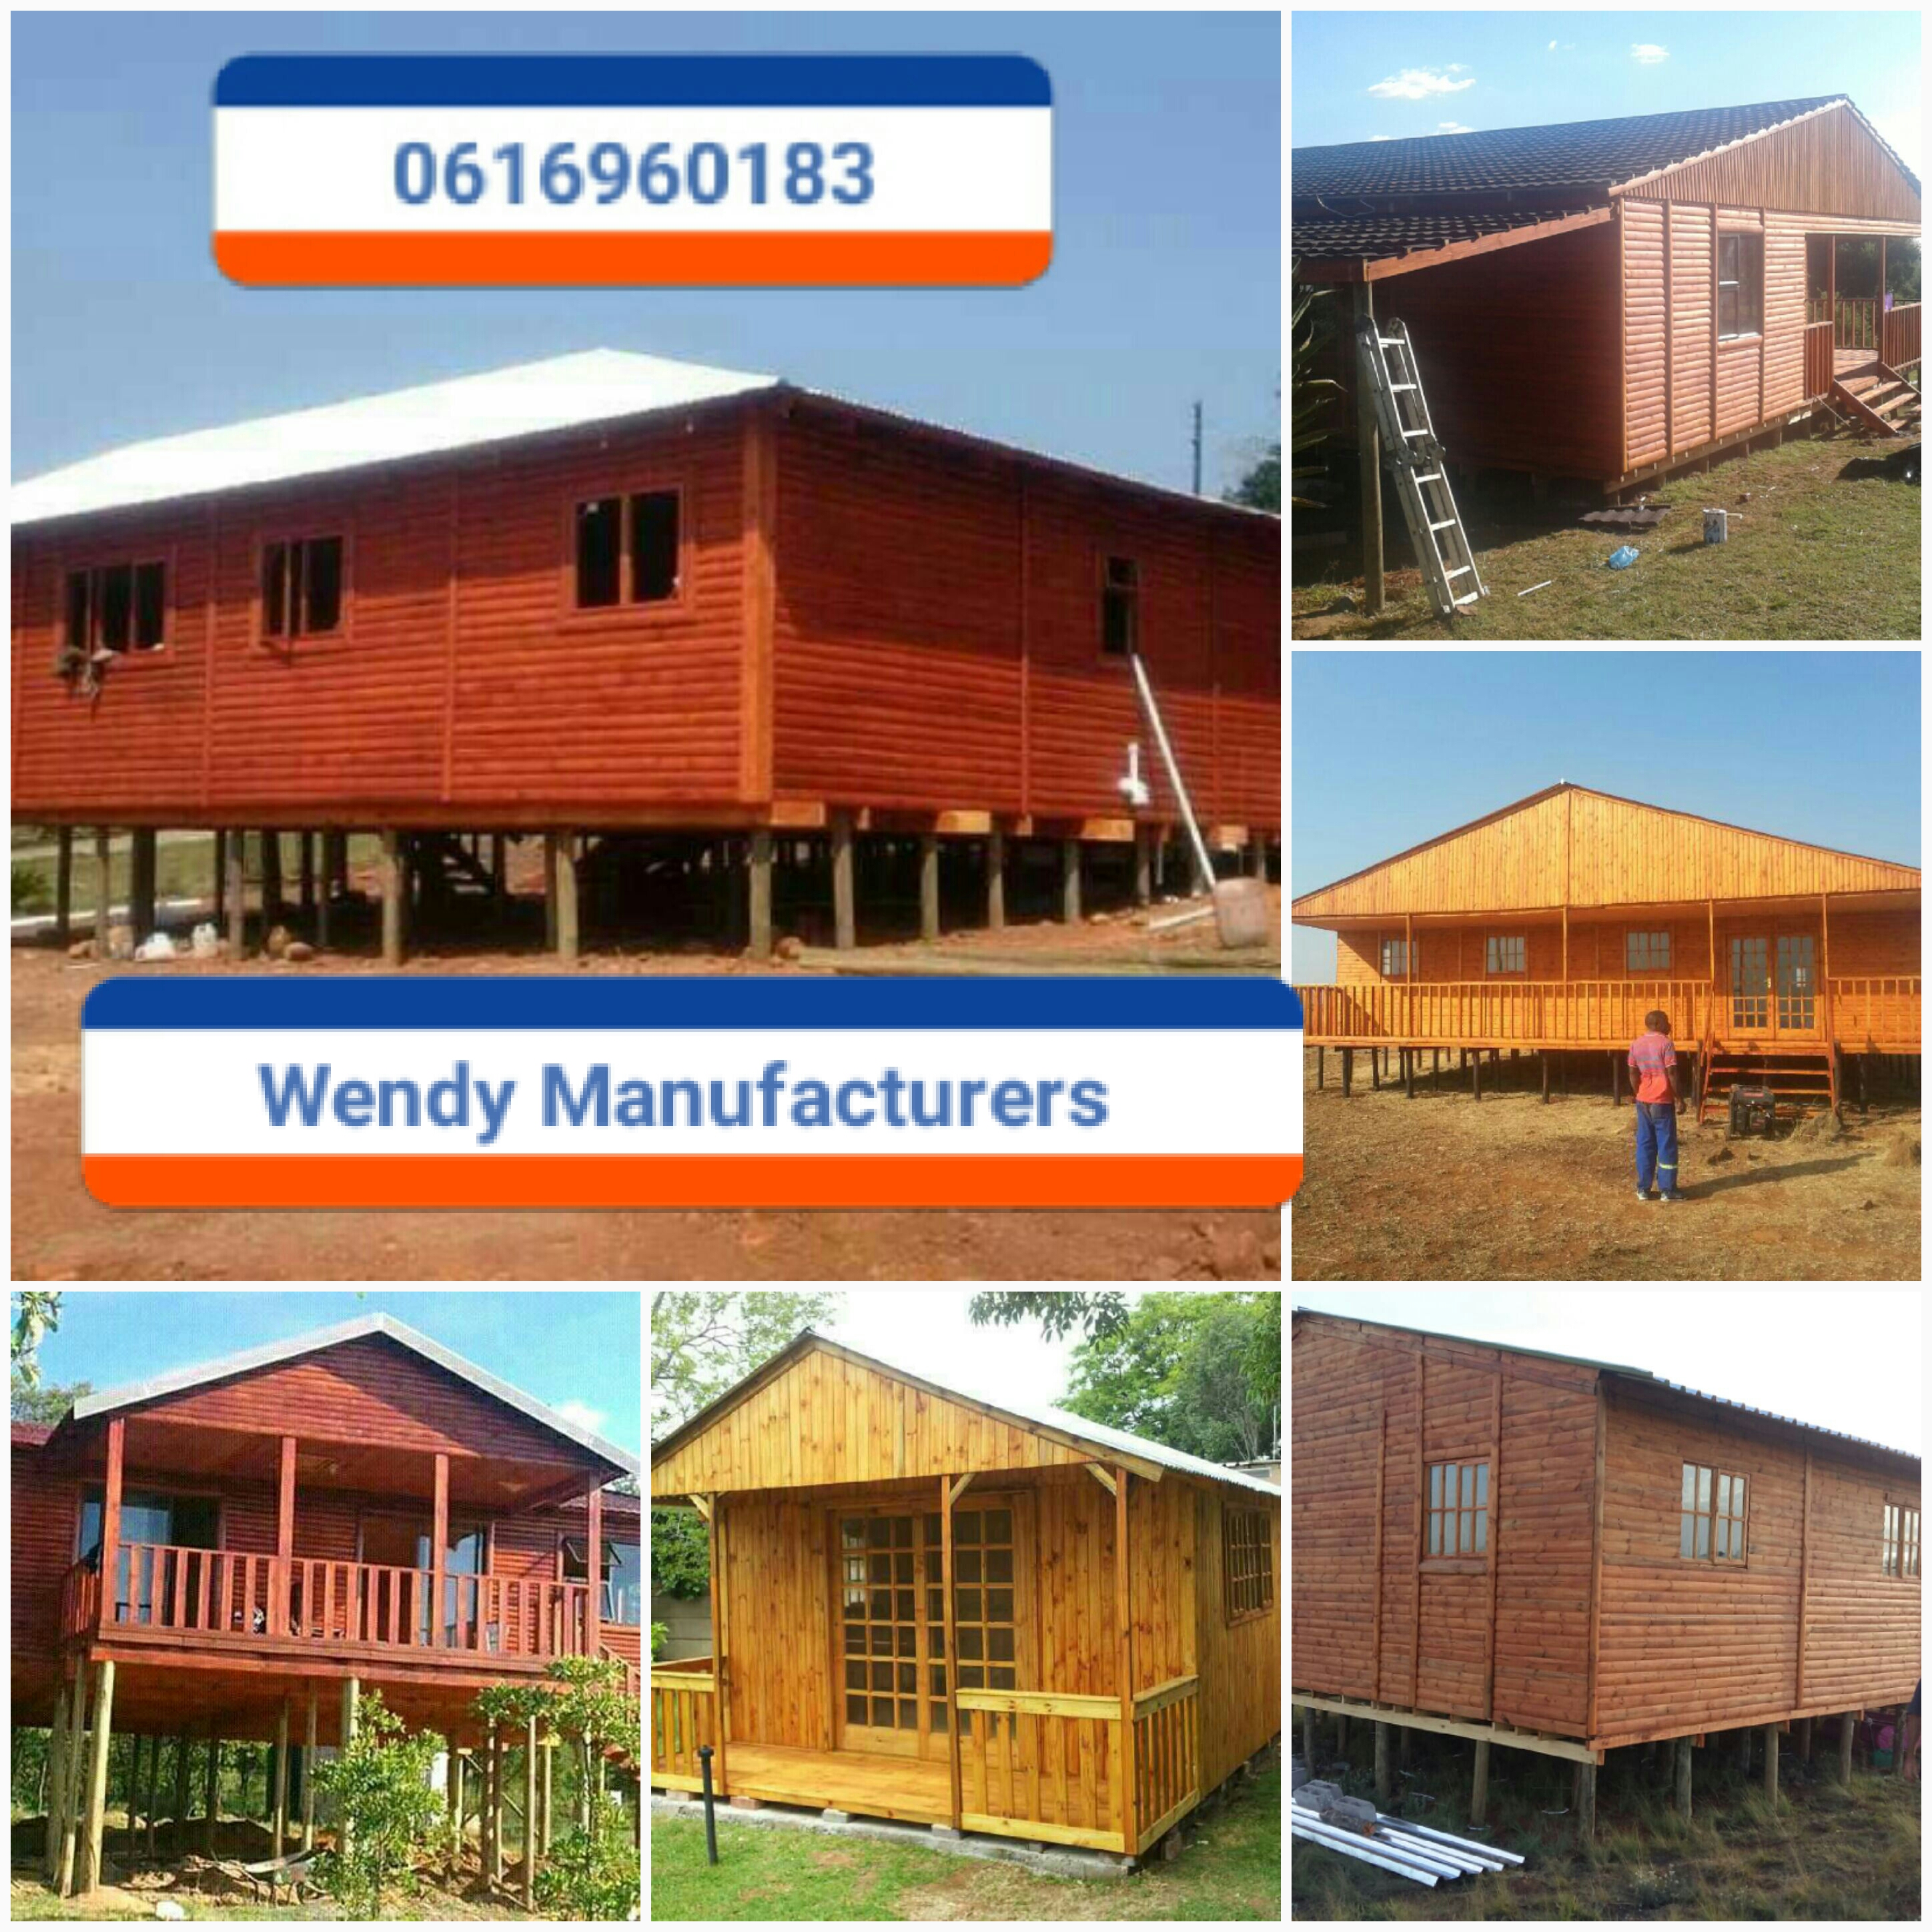 We make all types and sizes of wendy houses and log cabins at affordable and negotiate prices. Contact Isaac on 0616960183